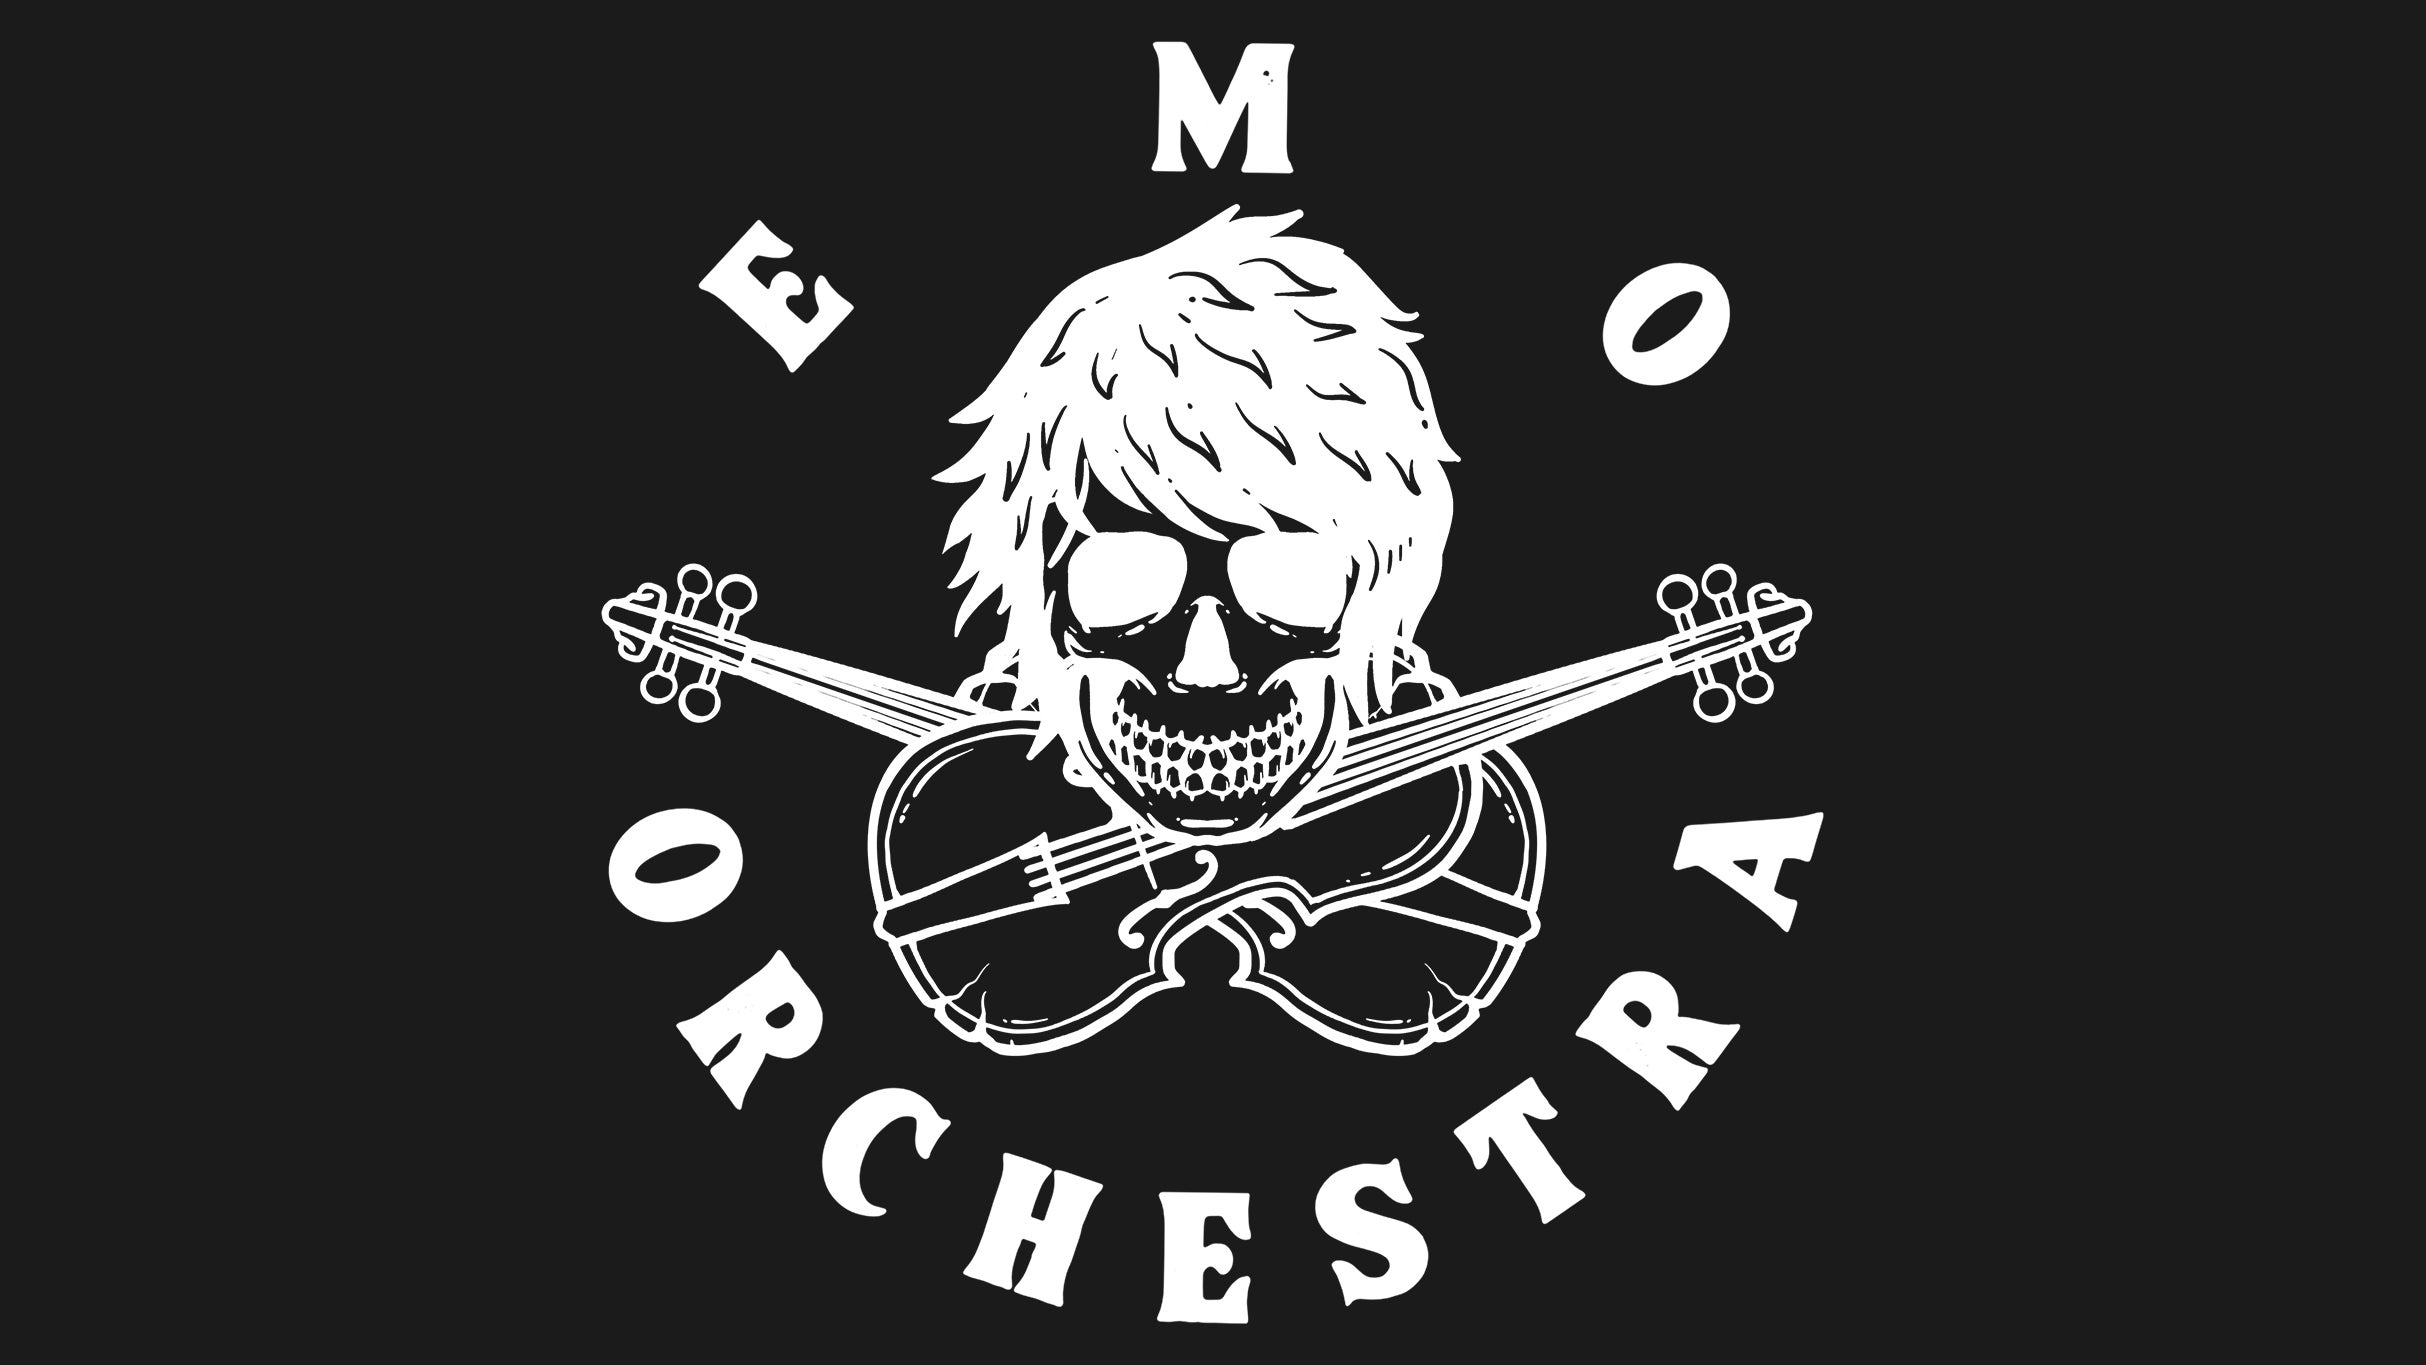 EMO ORCHESTRA featuring ESCAPE THE FATE free presale listing for event tickets in Los Angeles, CA (Orpheum Theatre)